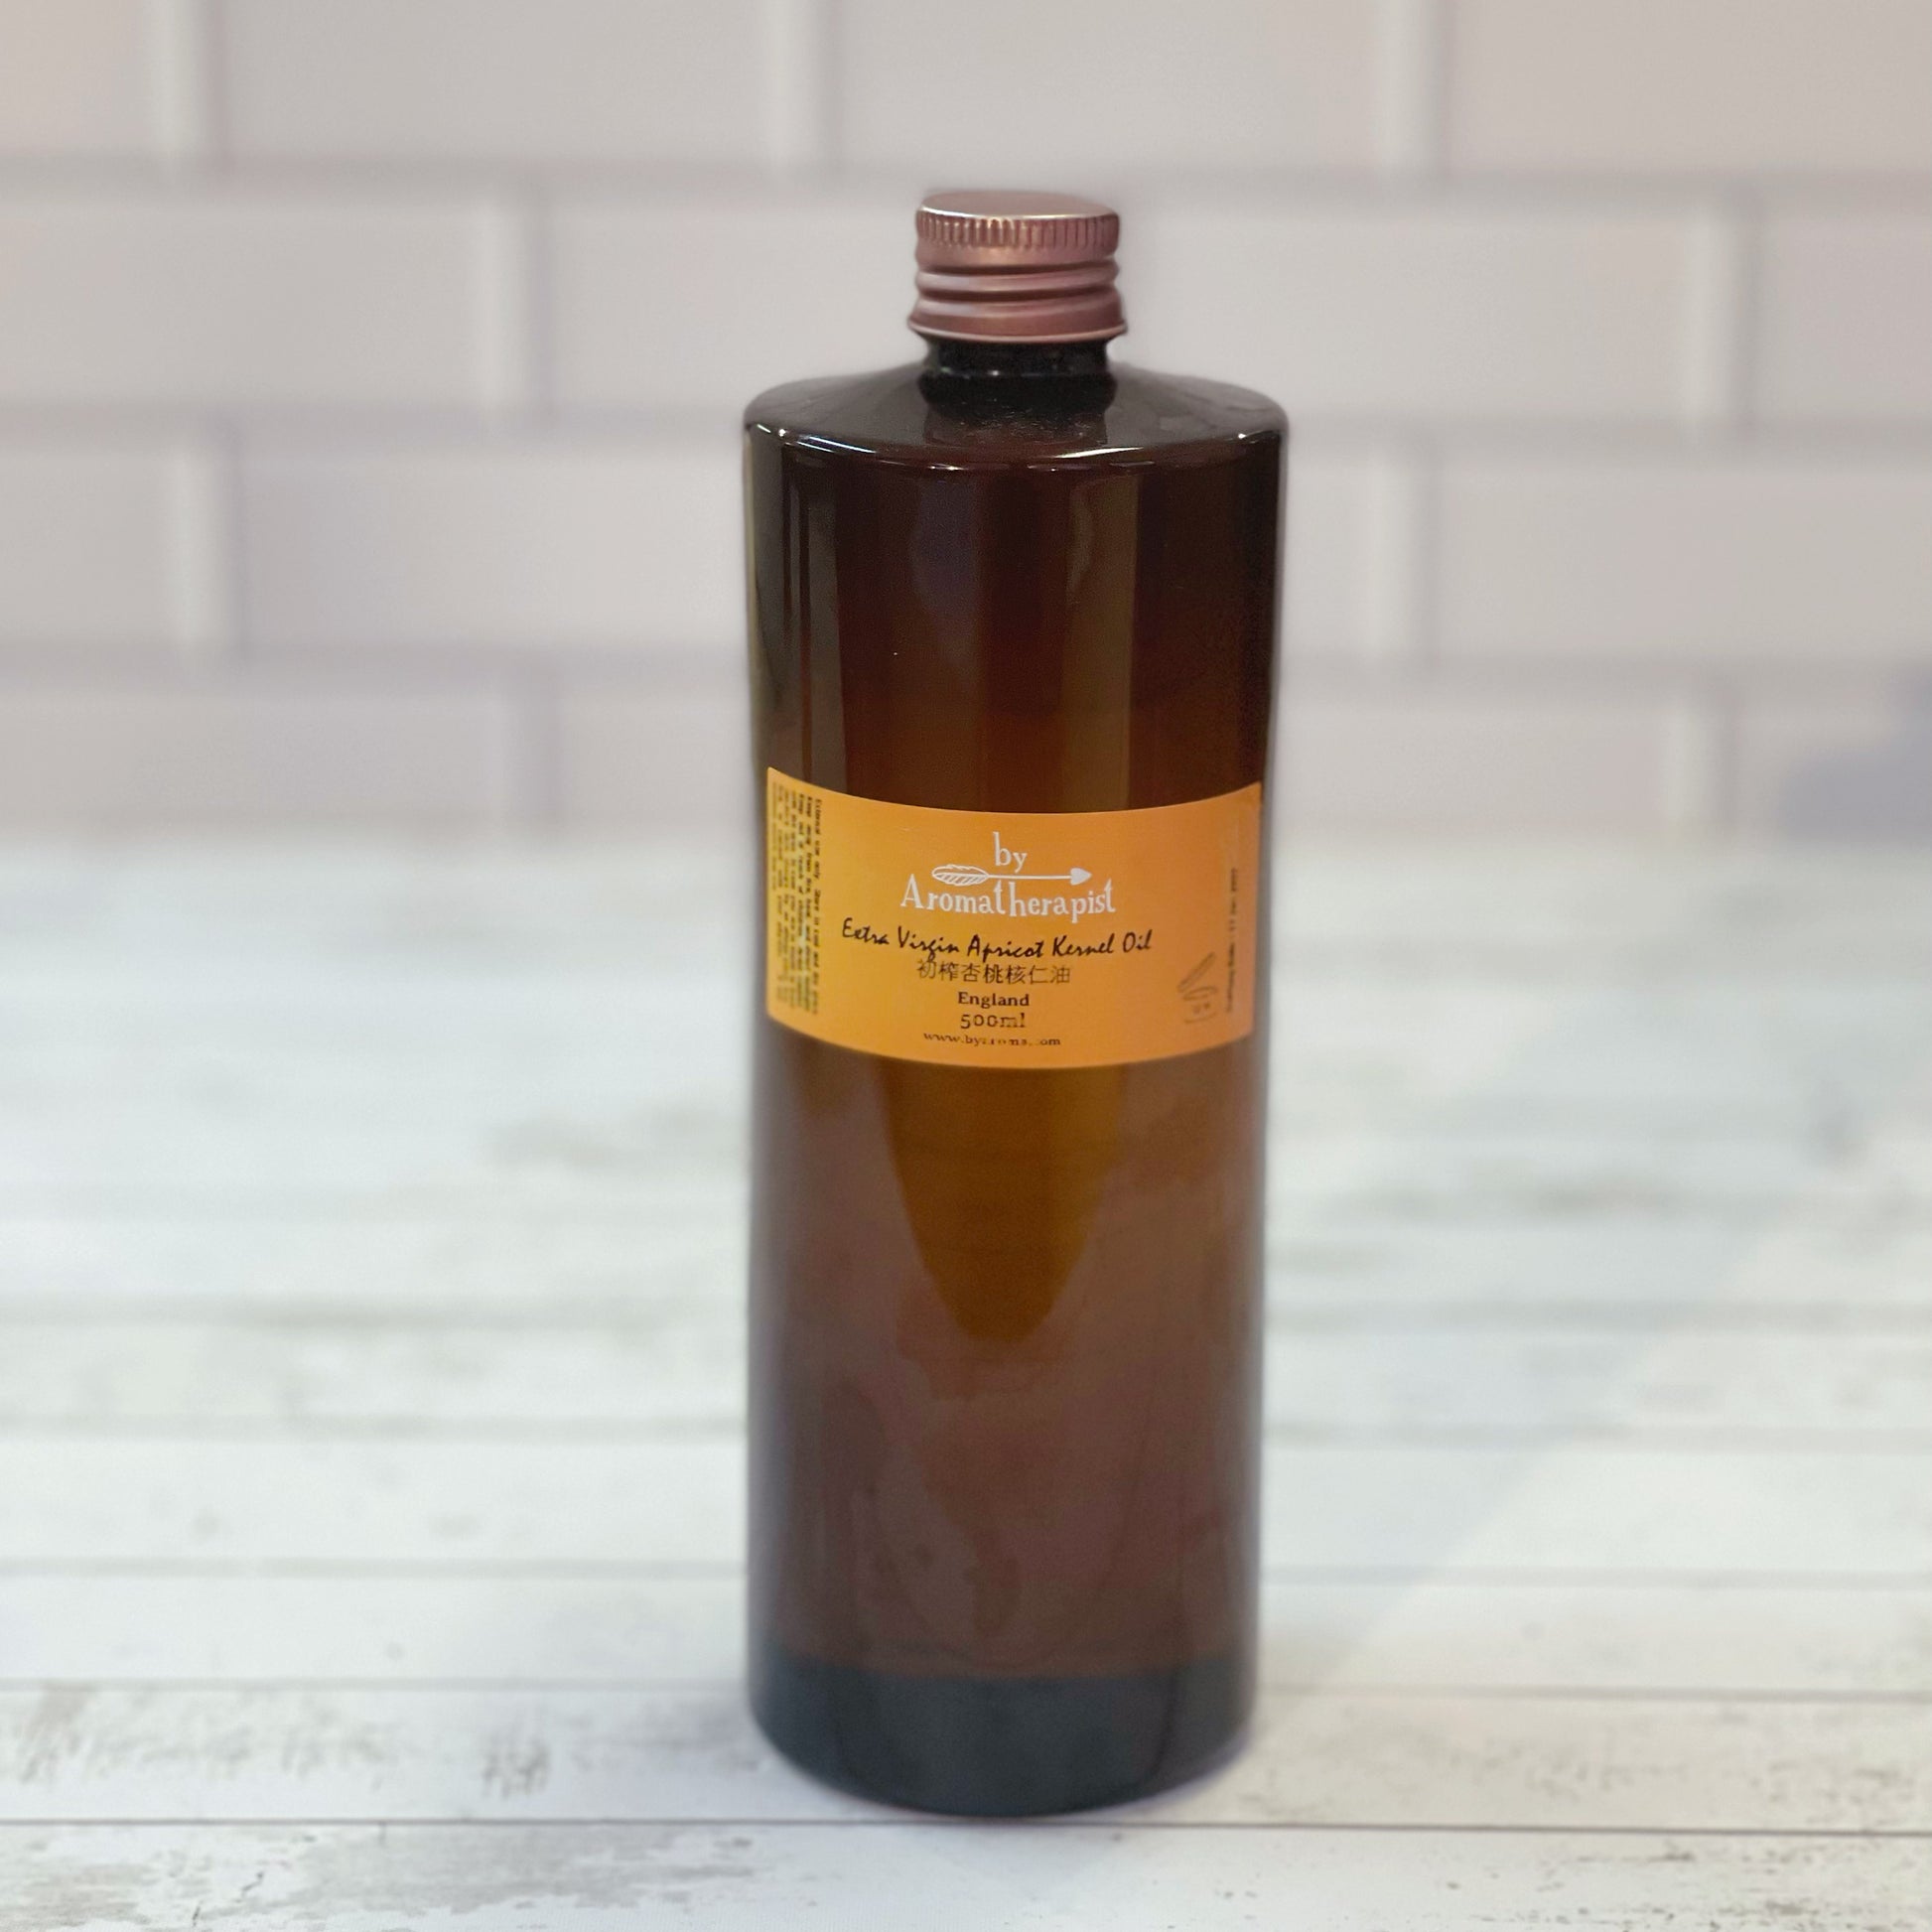 Extra Virgin Apricot Kernel Oil 初榨杏桃核仁油 (100ml/500ml) - Discover Health & Lifestyle Asia